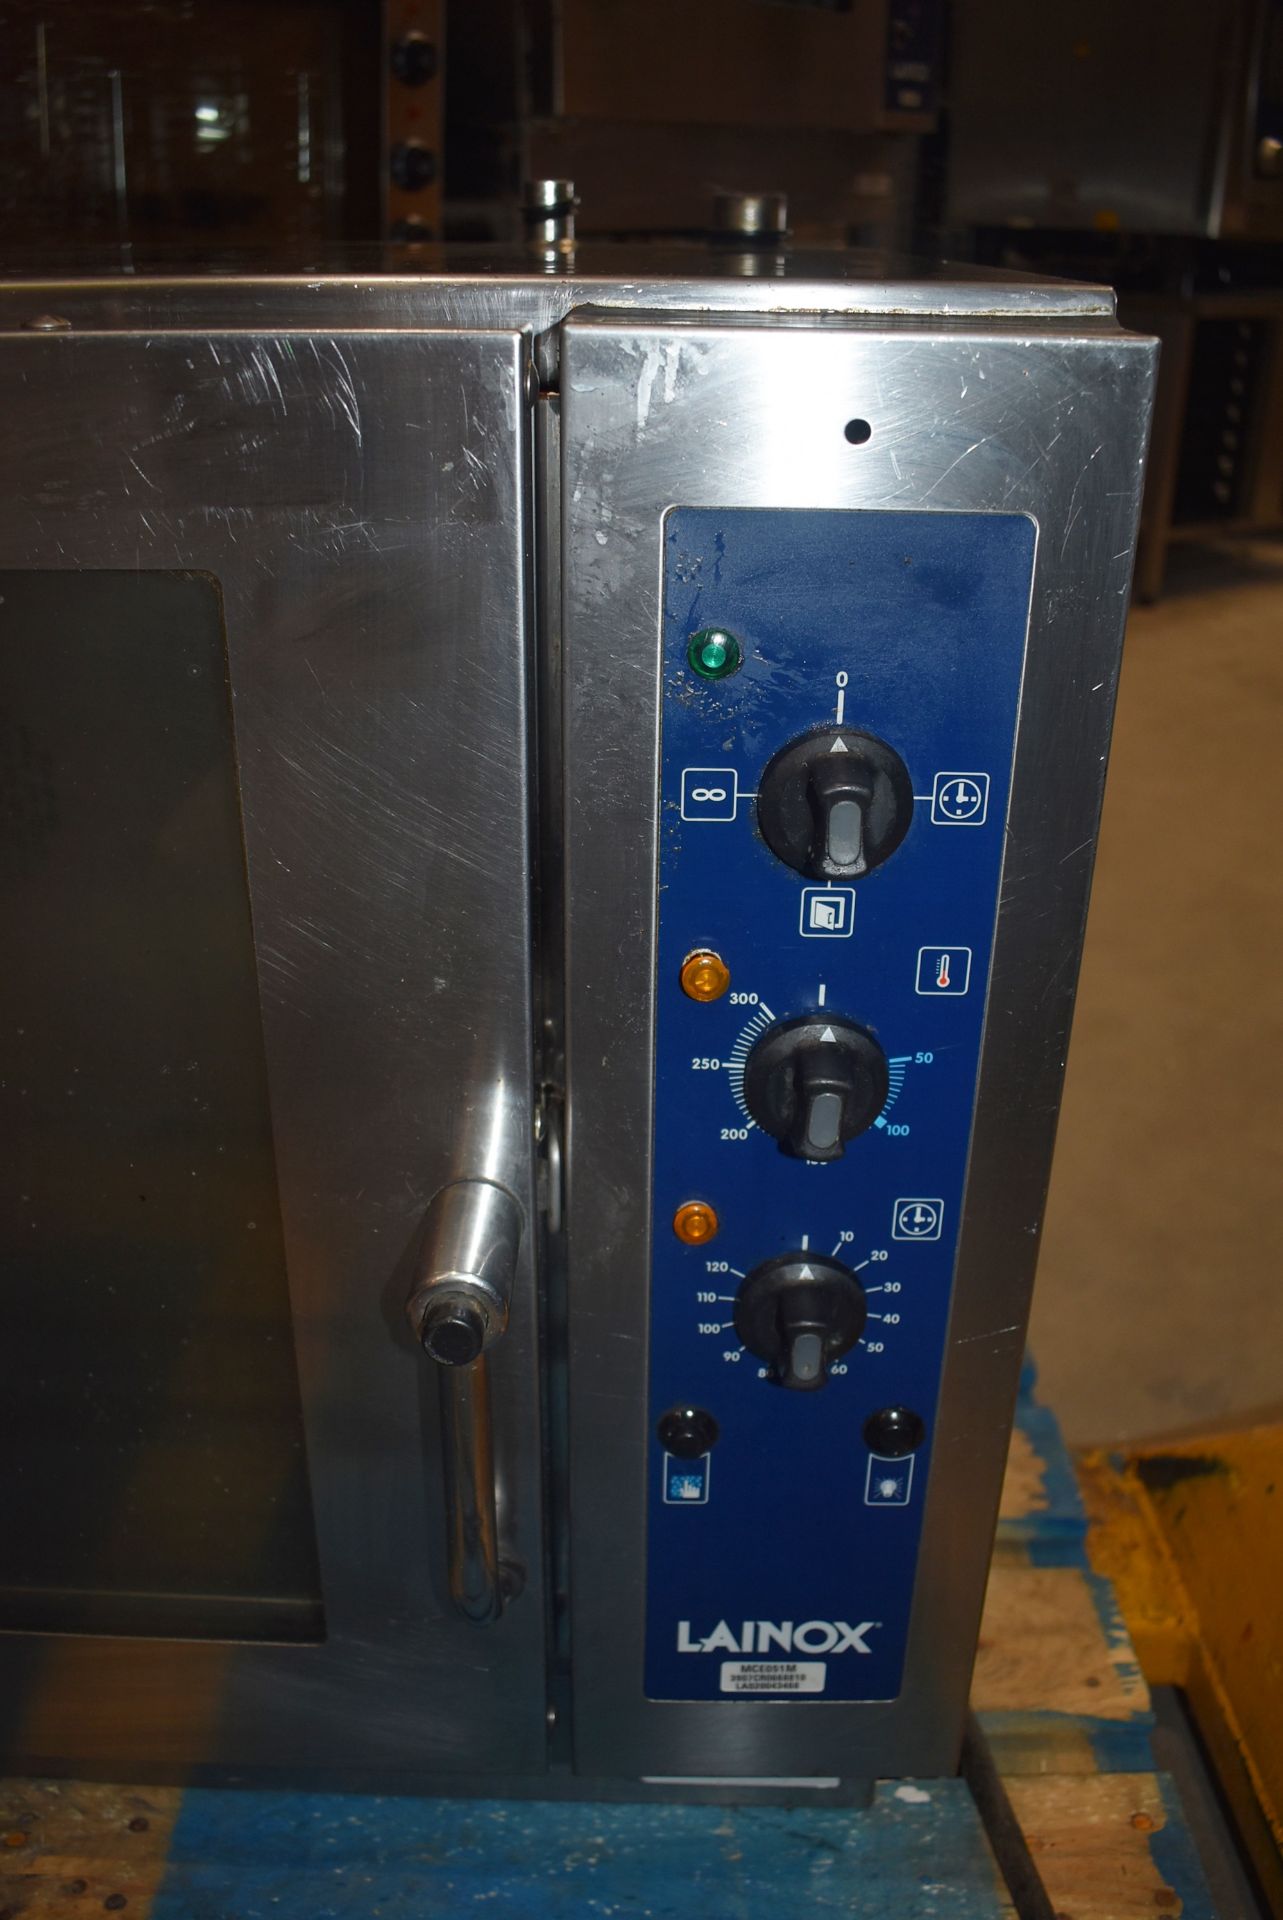 1 x Lainox MCE051M Commercial Electric 400v Convection Oven With Stainless Steel Exterior - Recently - Image 8 of 9